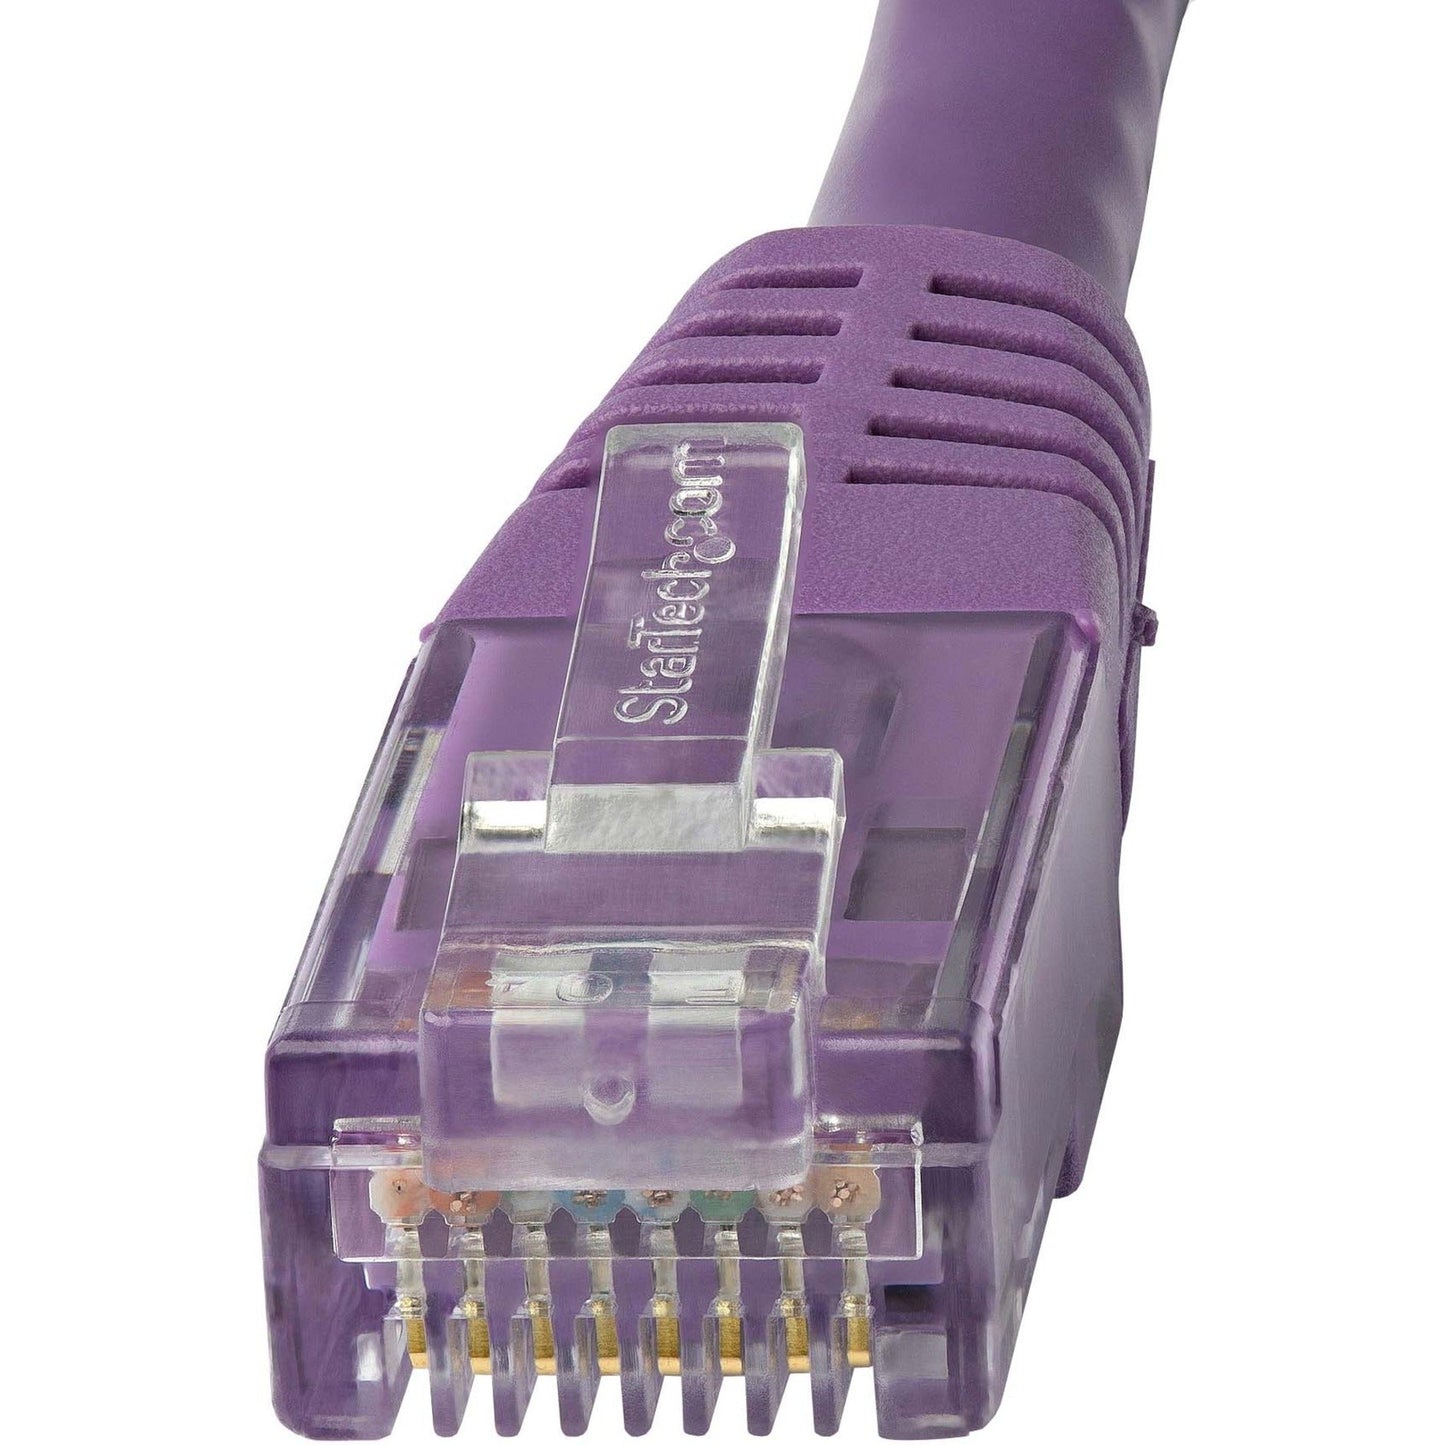 StarTech.com 25ft CAT6 Ethernet Cable - Purple Molded Gigabit - 100W PoE UTP 650MHz - Category 6 Patch Cord UL Certified Wiring/TIA